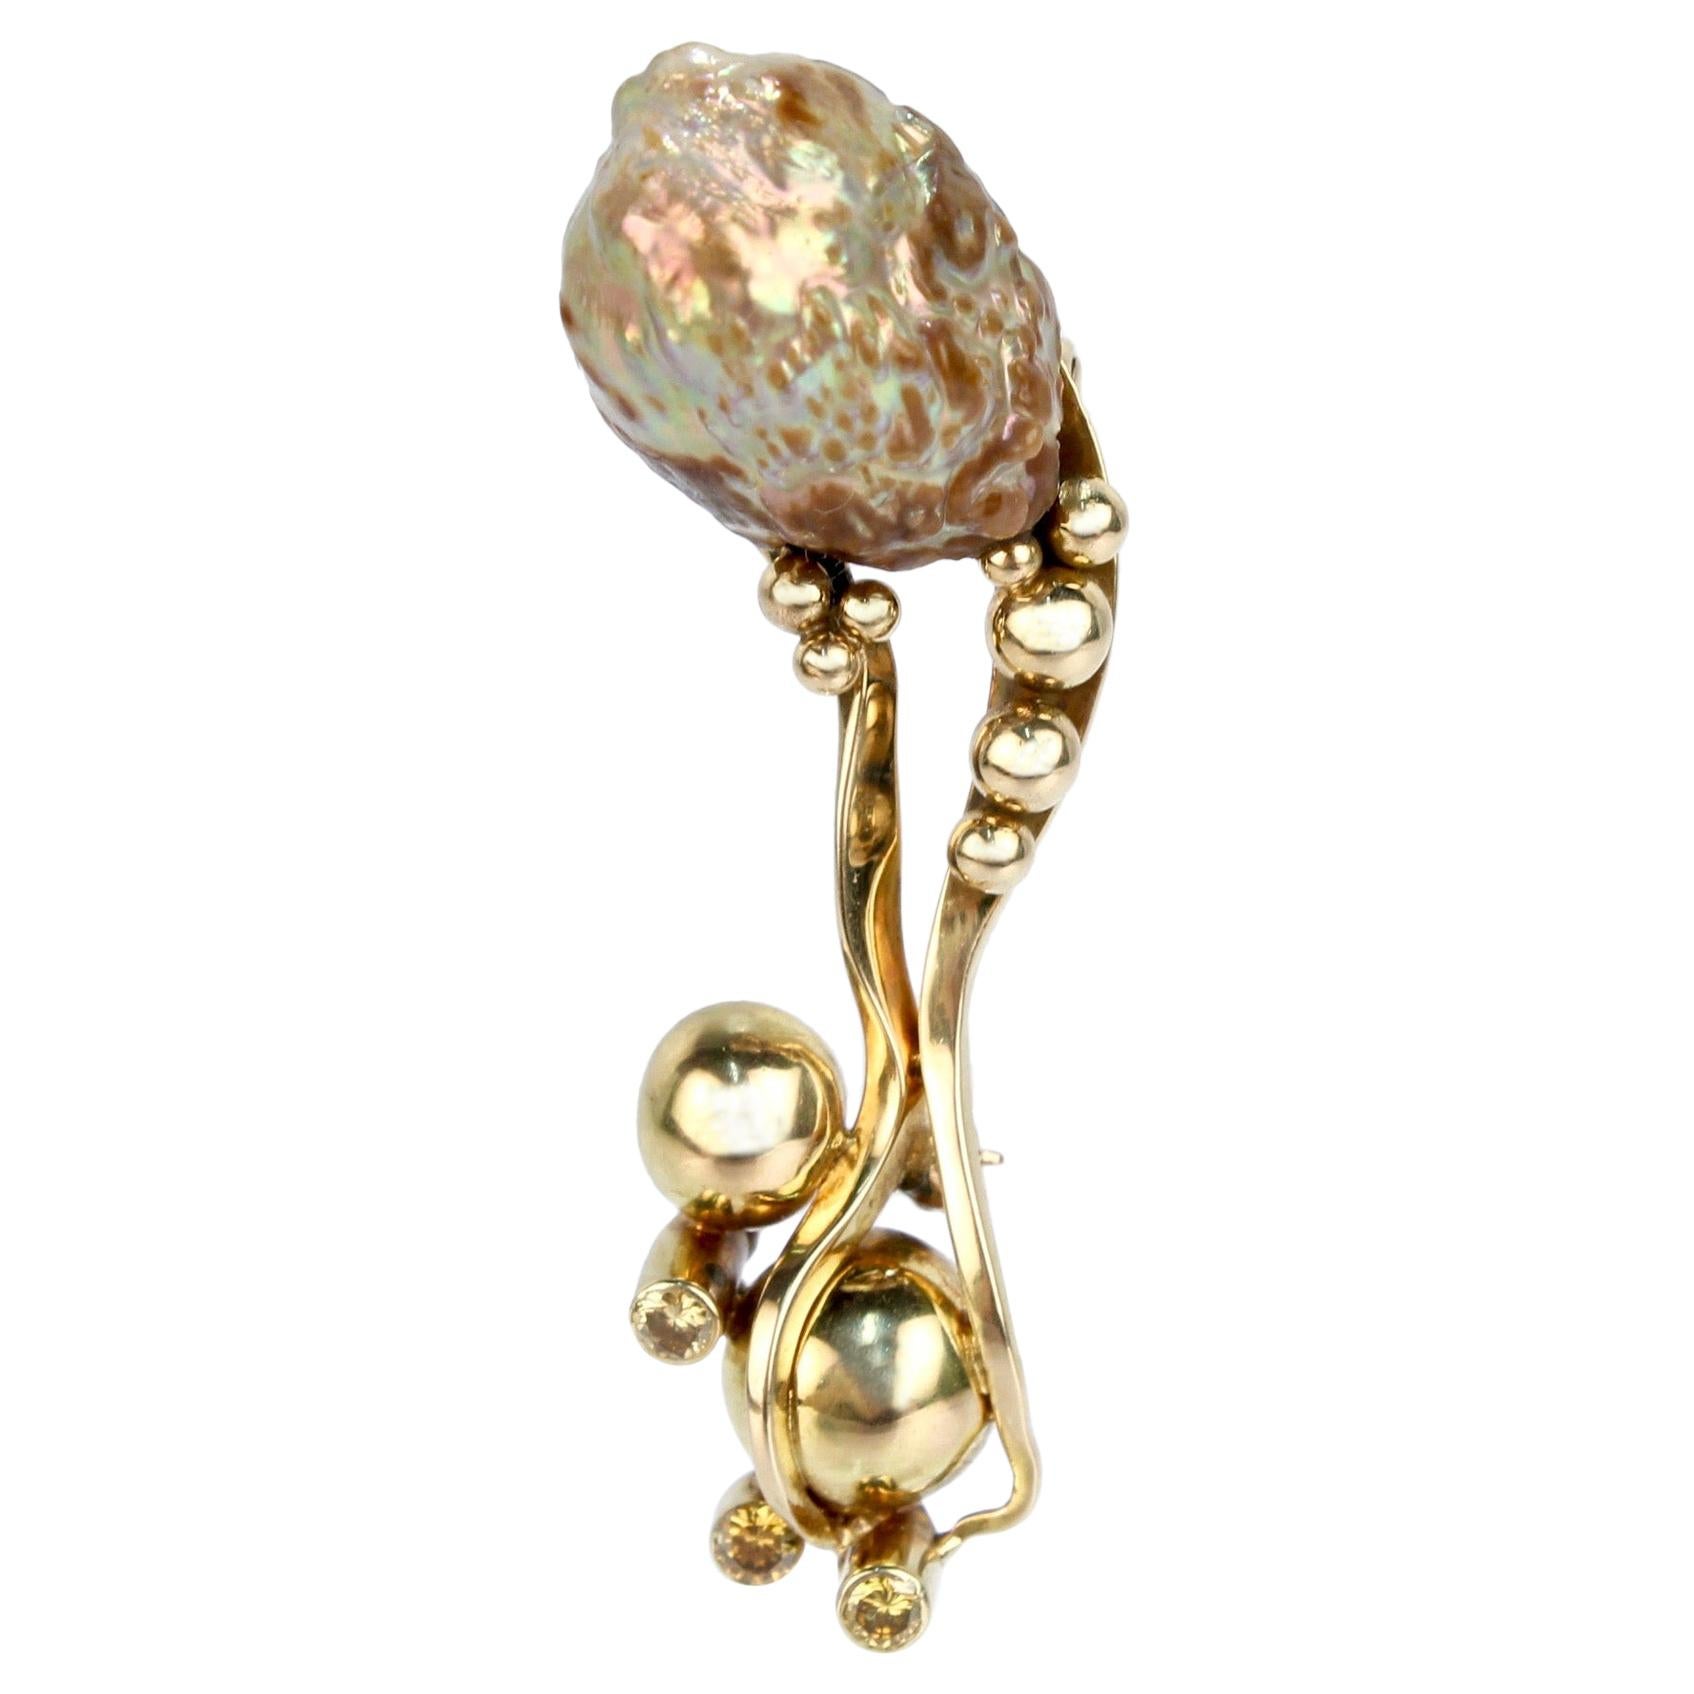 Modernist Biomorphic 14 Karat Gold Yellow Diamond & Baroque Pearl Brooch or Pin For Sale